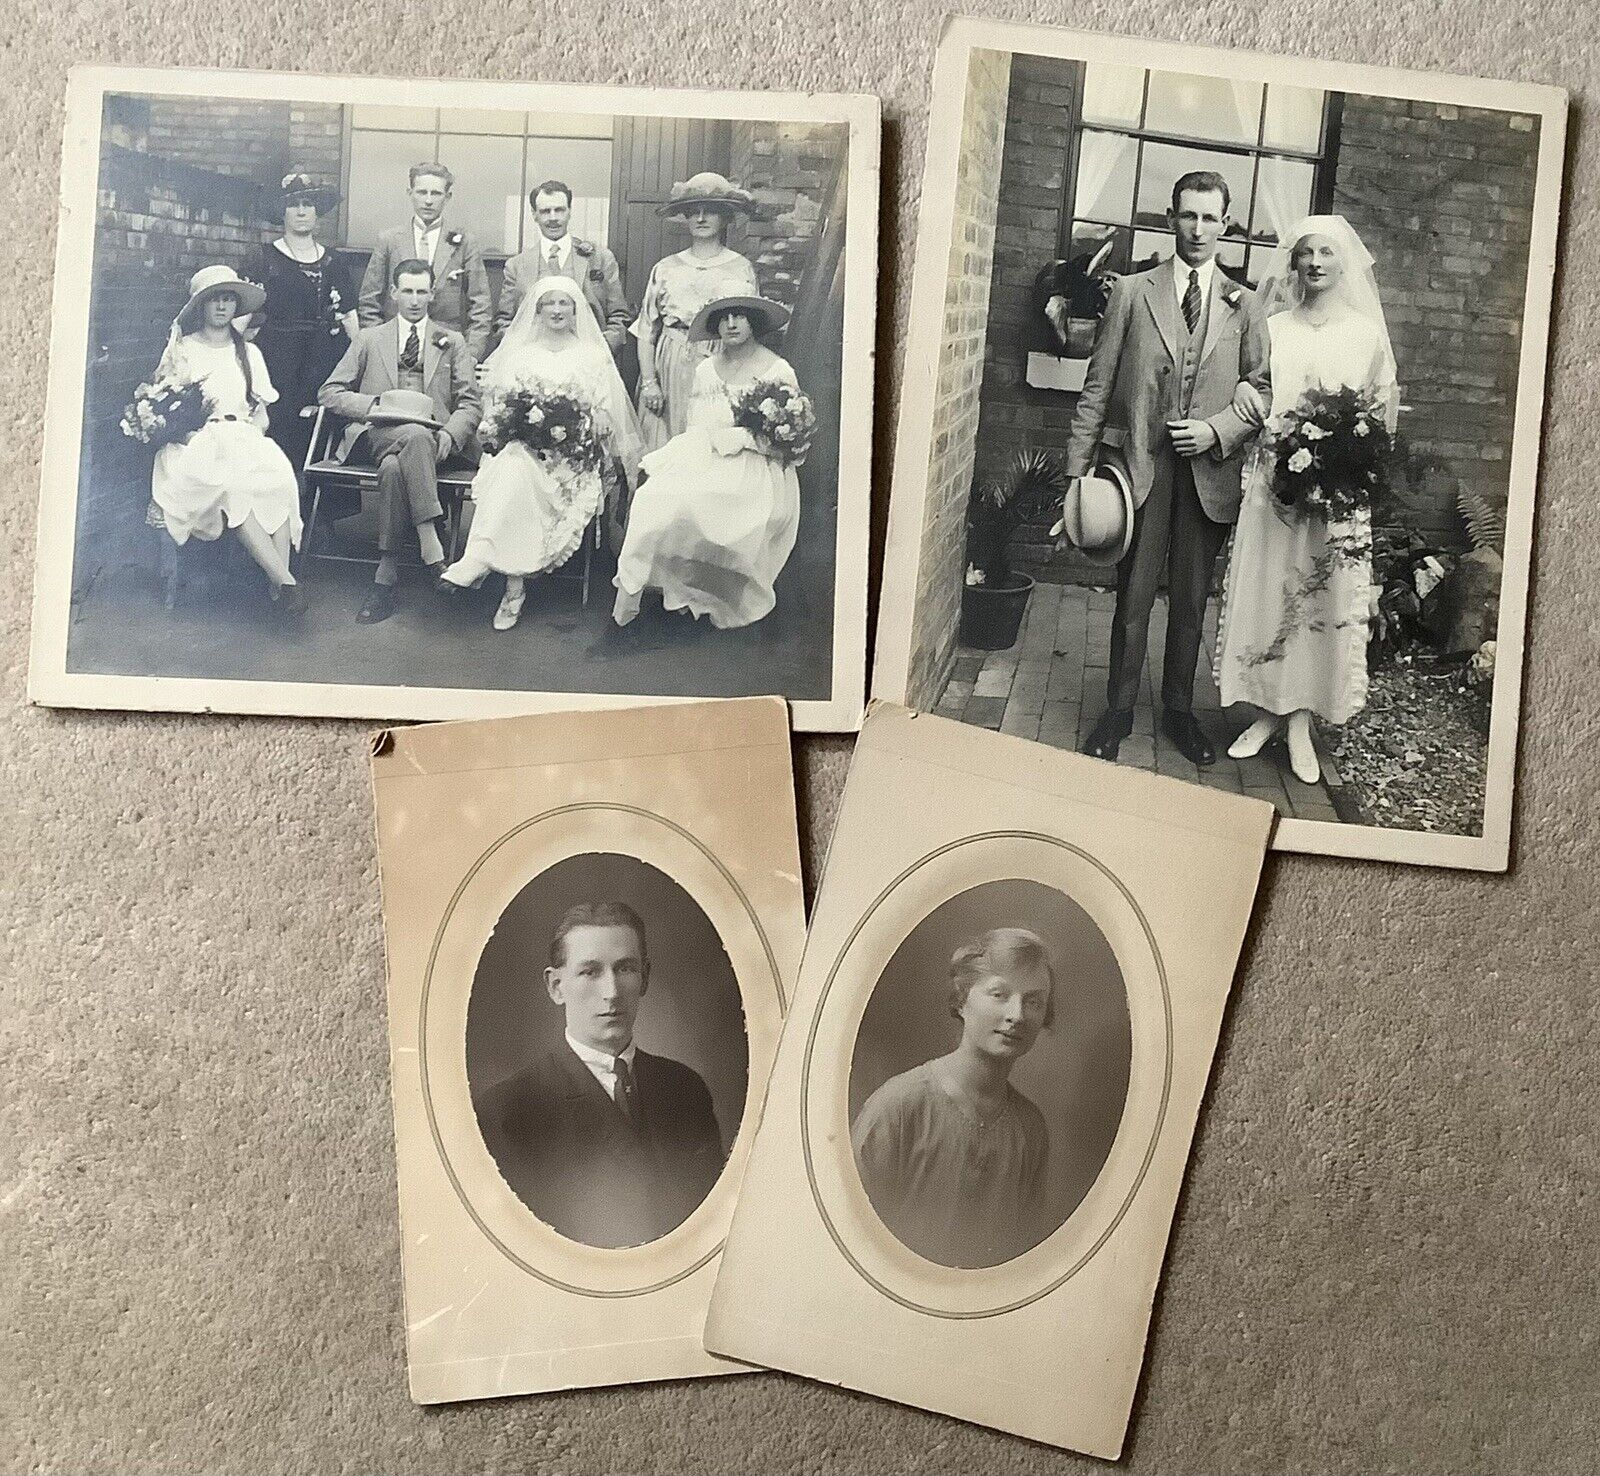 Four Edwardian Photographs Wedding Great Costumes 1920’s Social History